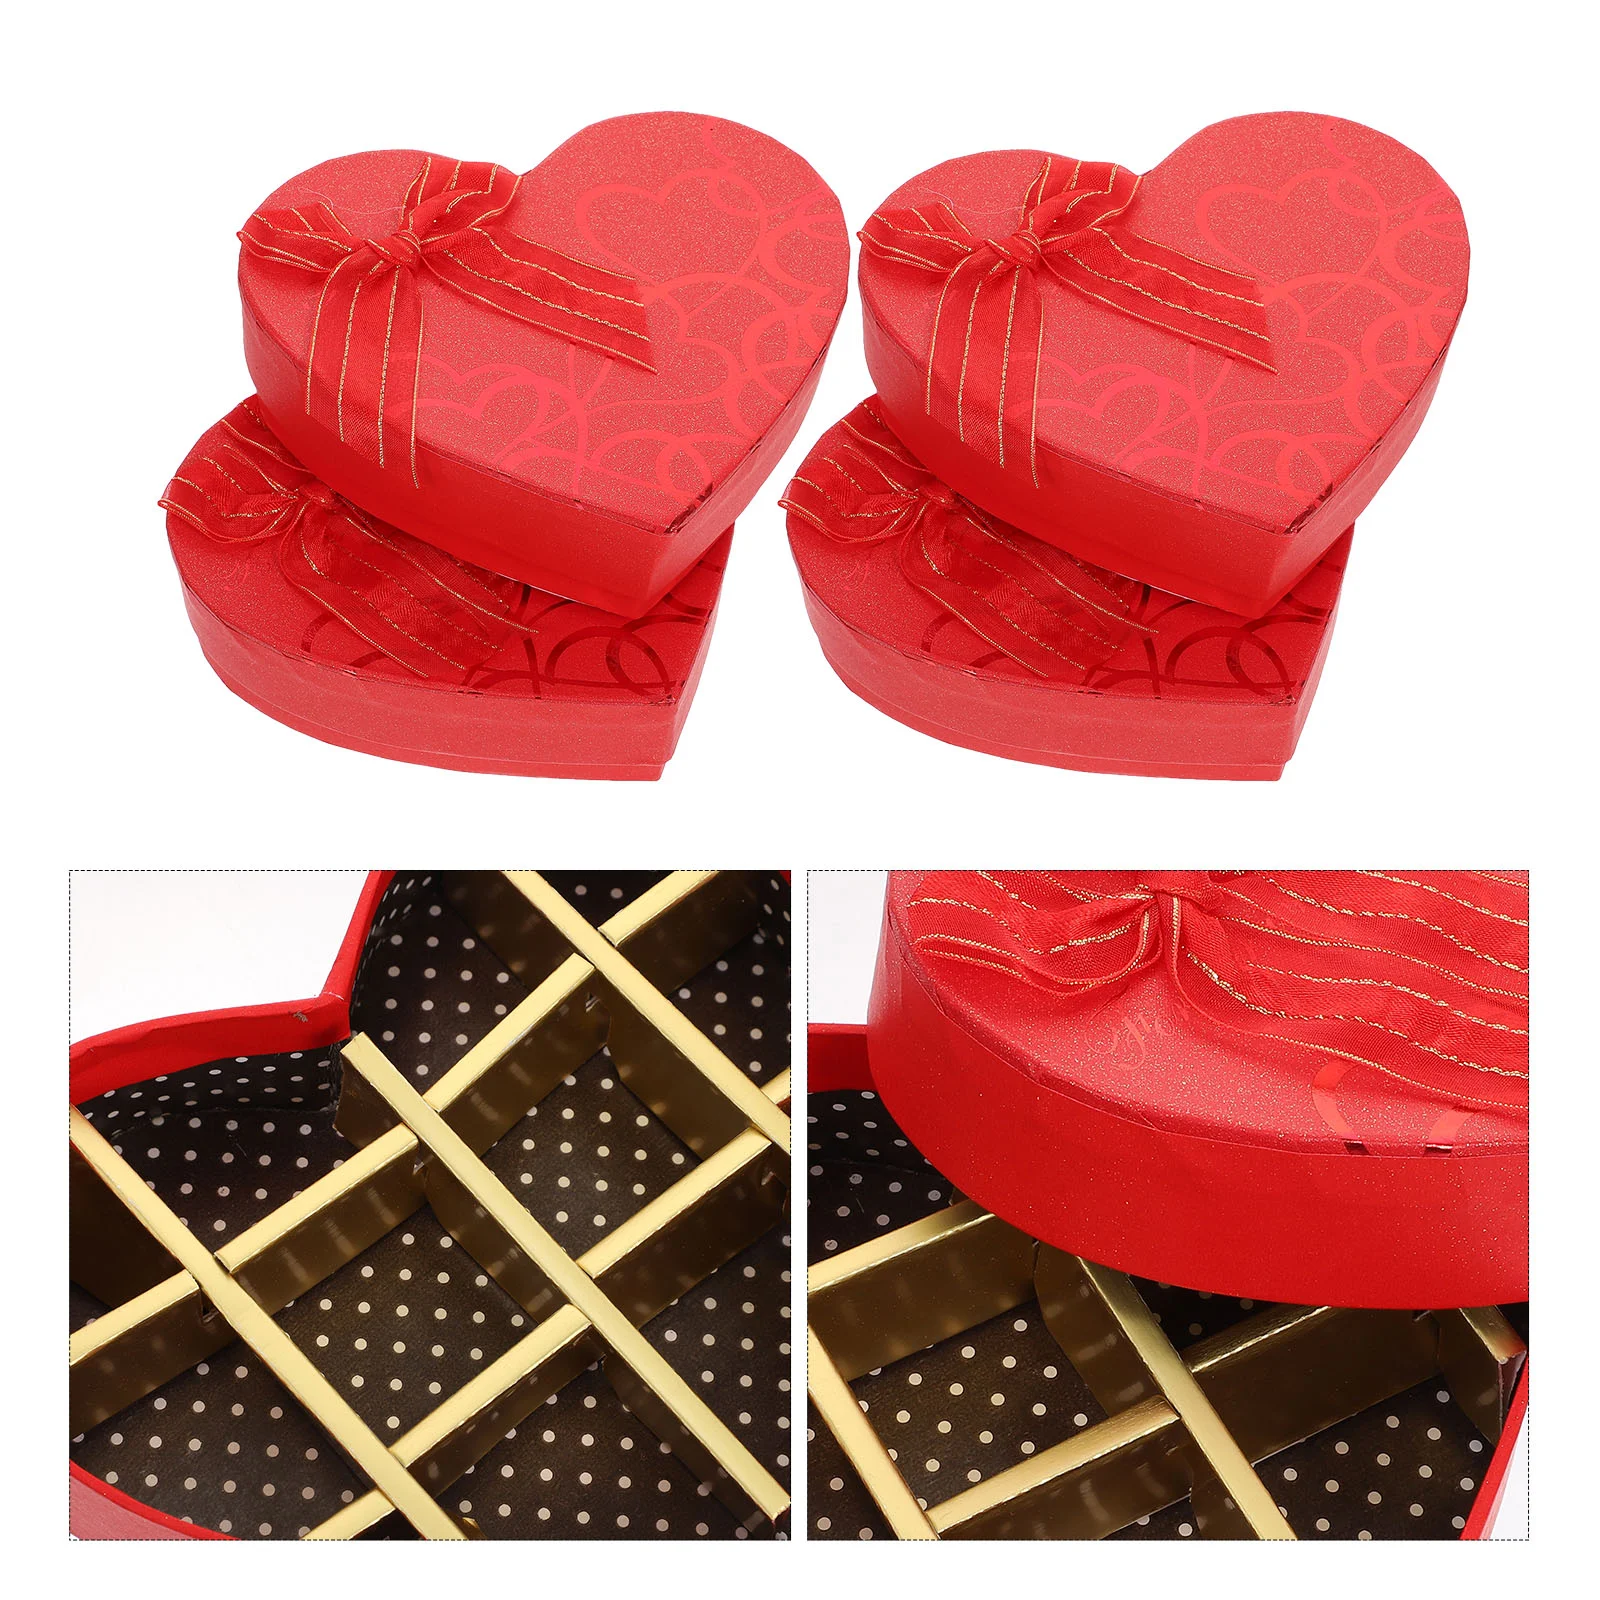 

4 Pcs Chocolate Box Boxes Mens Gifts Dessert Case Present Storage Paper Jam Container Bridesmaid Drawers